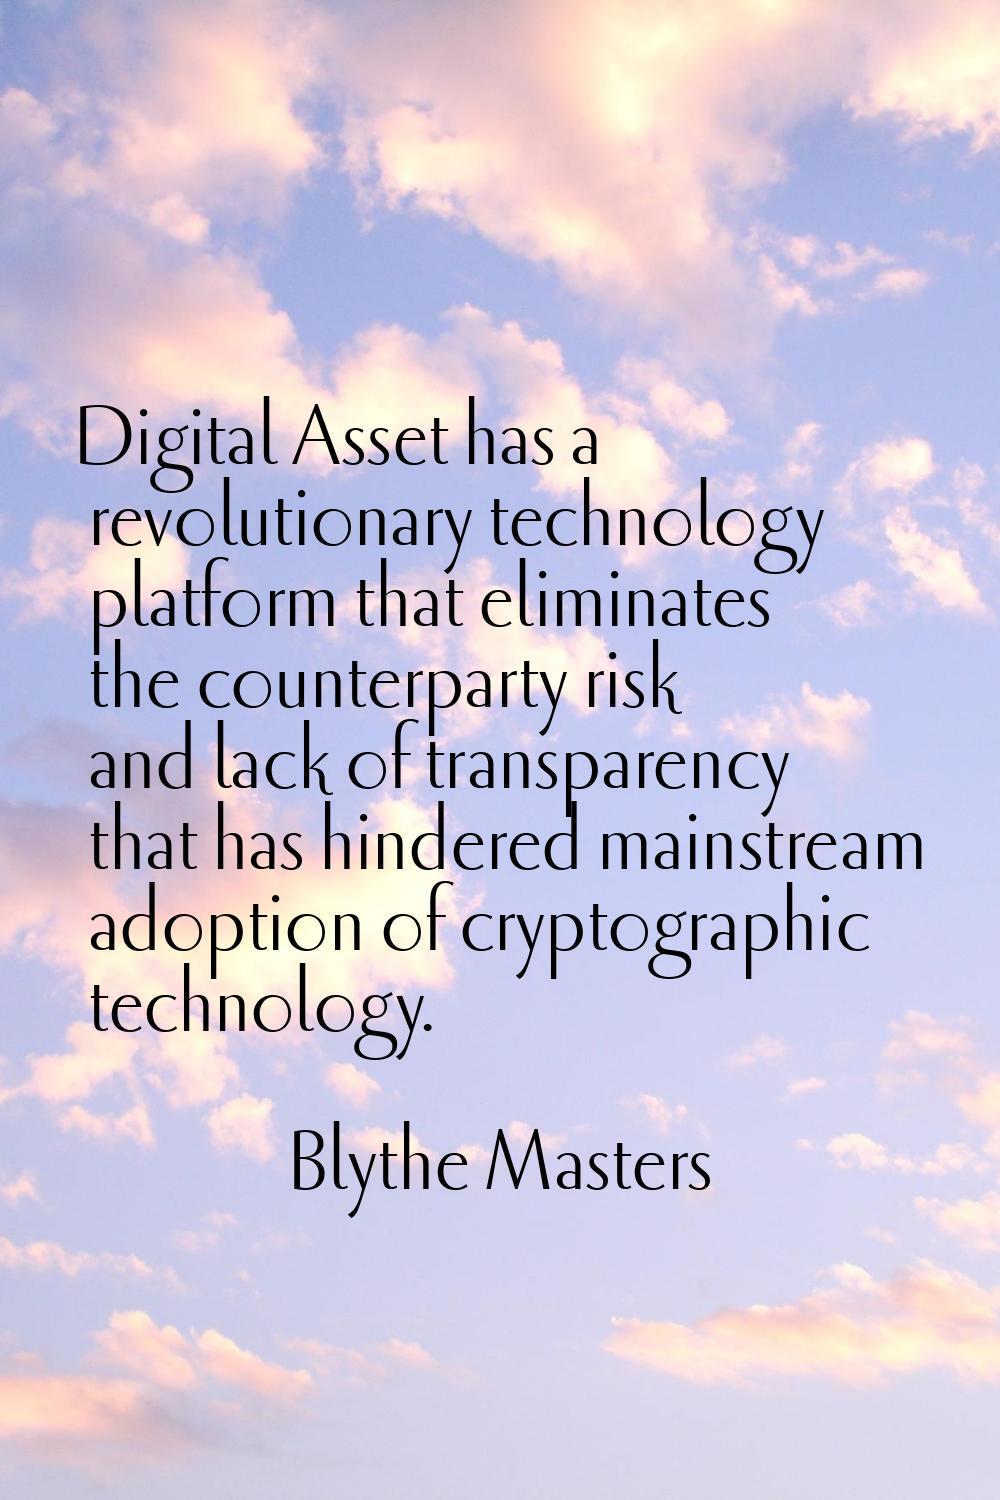 Digital Asset has a revolutionary technology platform that eliminates the counterparty risk and lac